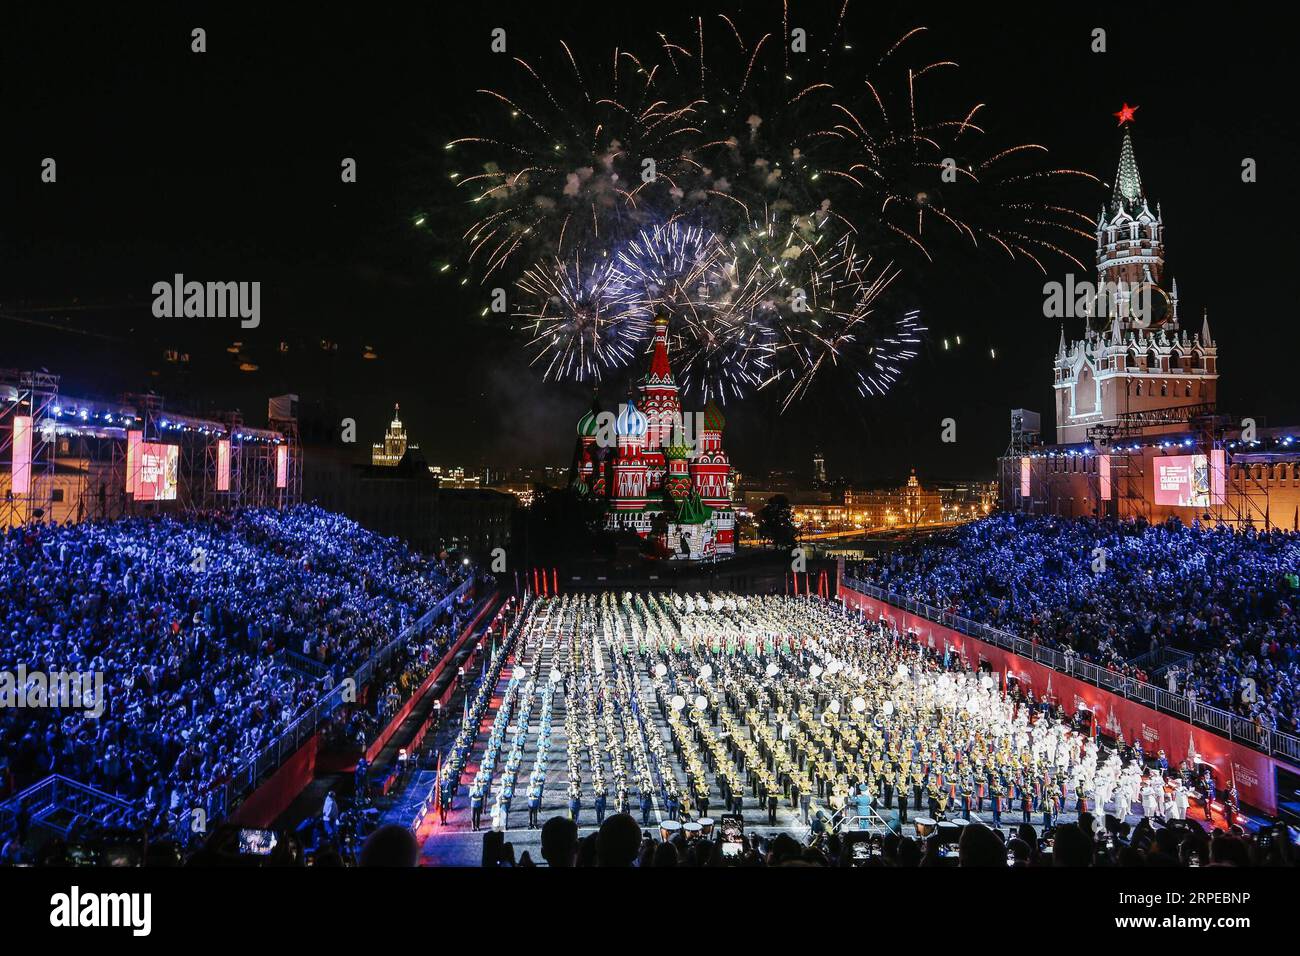 Russland, Militärmusik-Festival in Moskau (190824) -- MOSCOW, Aug. 24, 2019 -- Fireworks burst over the Red Square during the opening day of Spasskaya Tower International Military Music Festival in Moscow, Russia, on Aug. 23, 2019. The annual military music festival opened on Friday on the Red Square in Moscow, and will run until September 1. Evgeny Sinitsyn) RUSSIA-MOSCOW-MILITARY MUSIC FESTIVAL-OPENING BaixXueqi PUBLICATIONxNOTxINxCHN Stock Photo